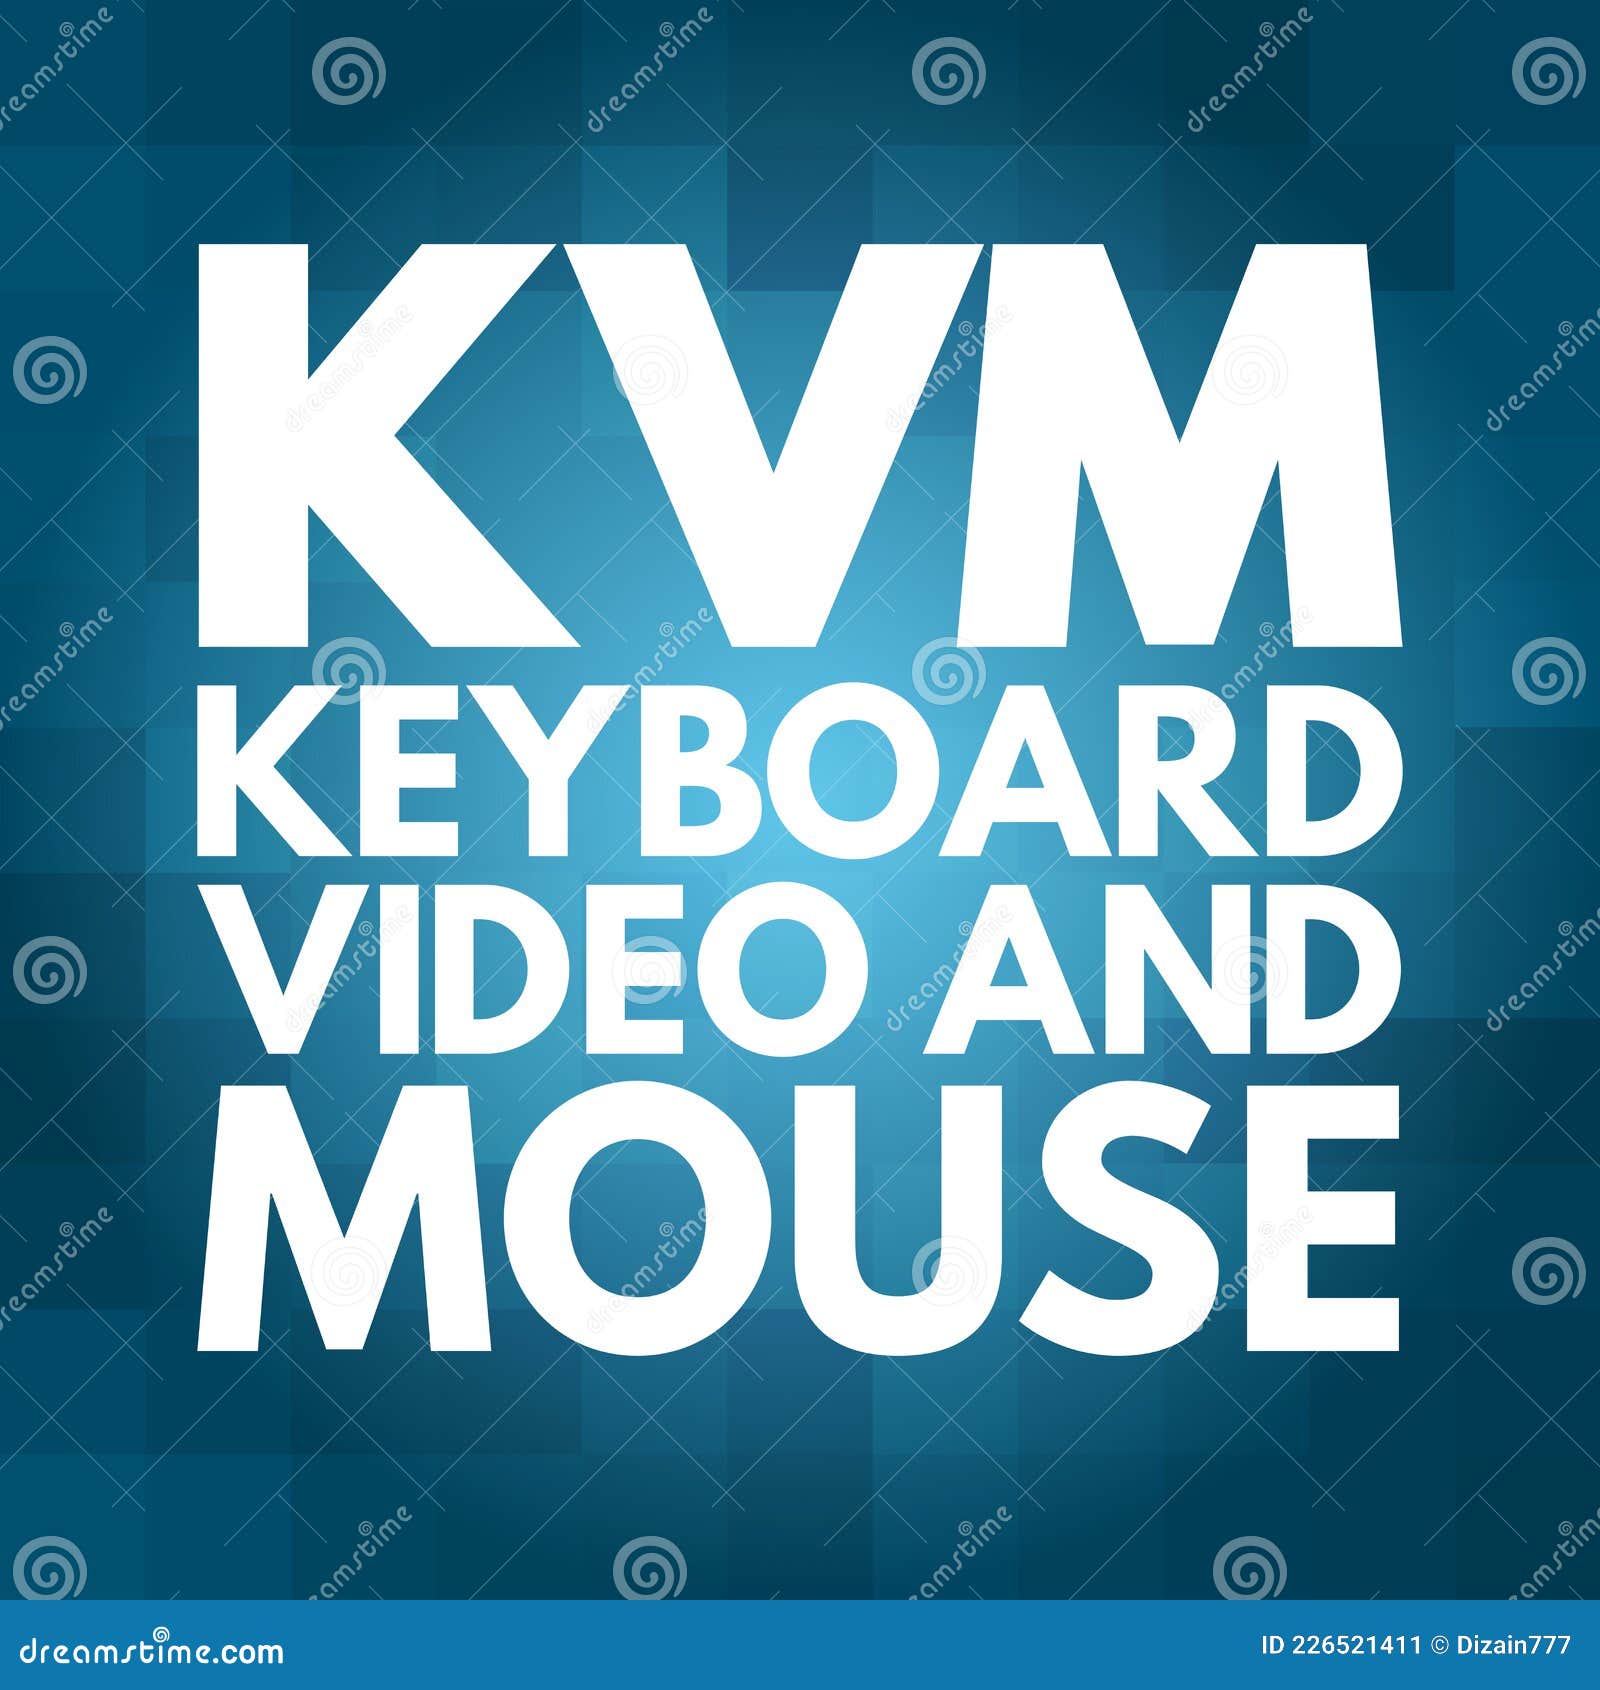 kvm - keyboard video and mouse acronym, technology concept background